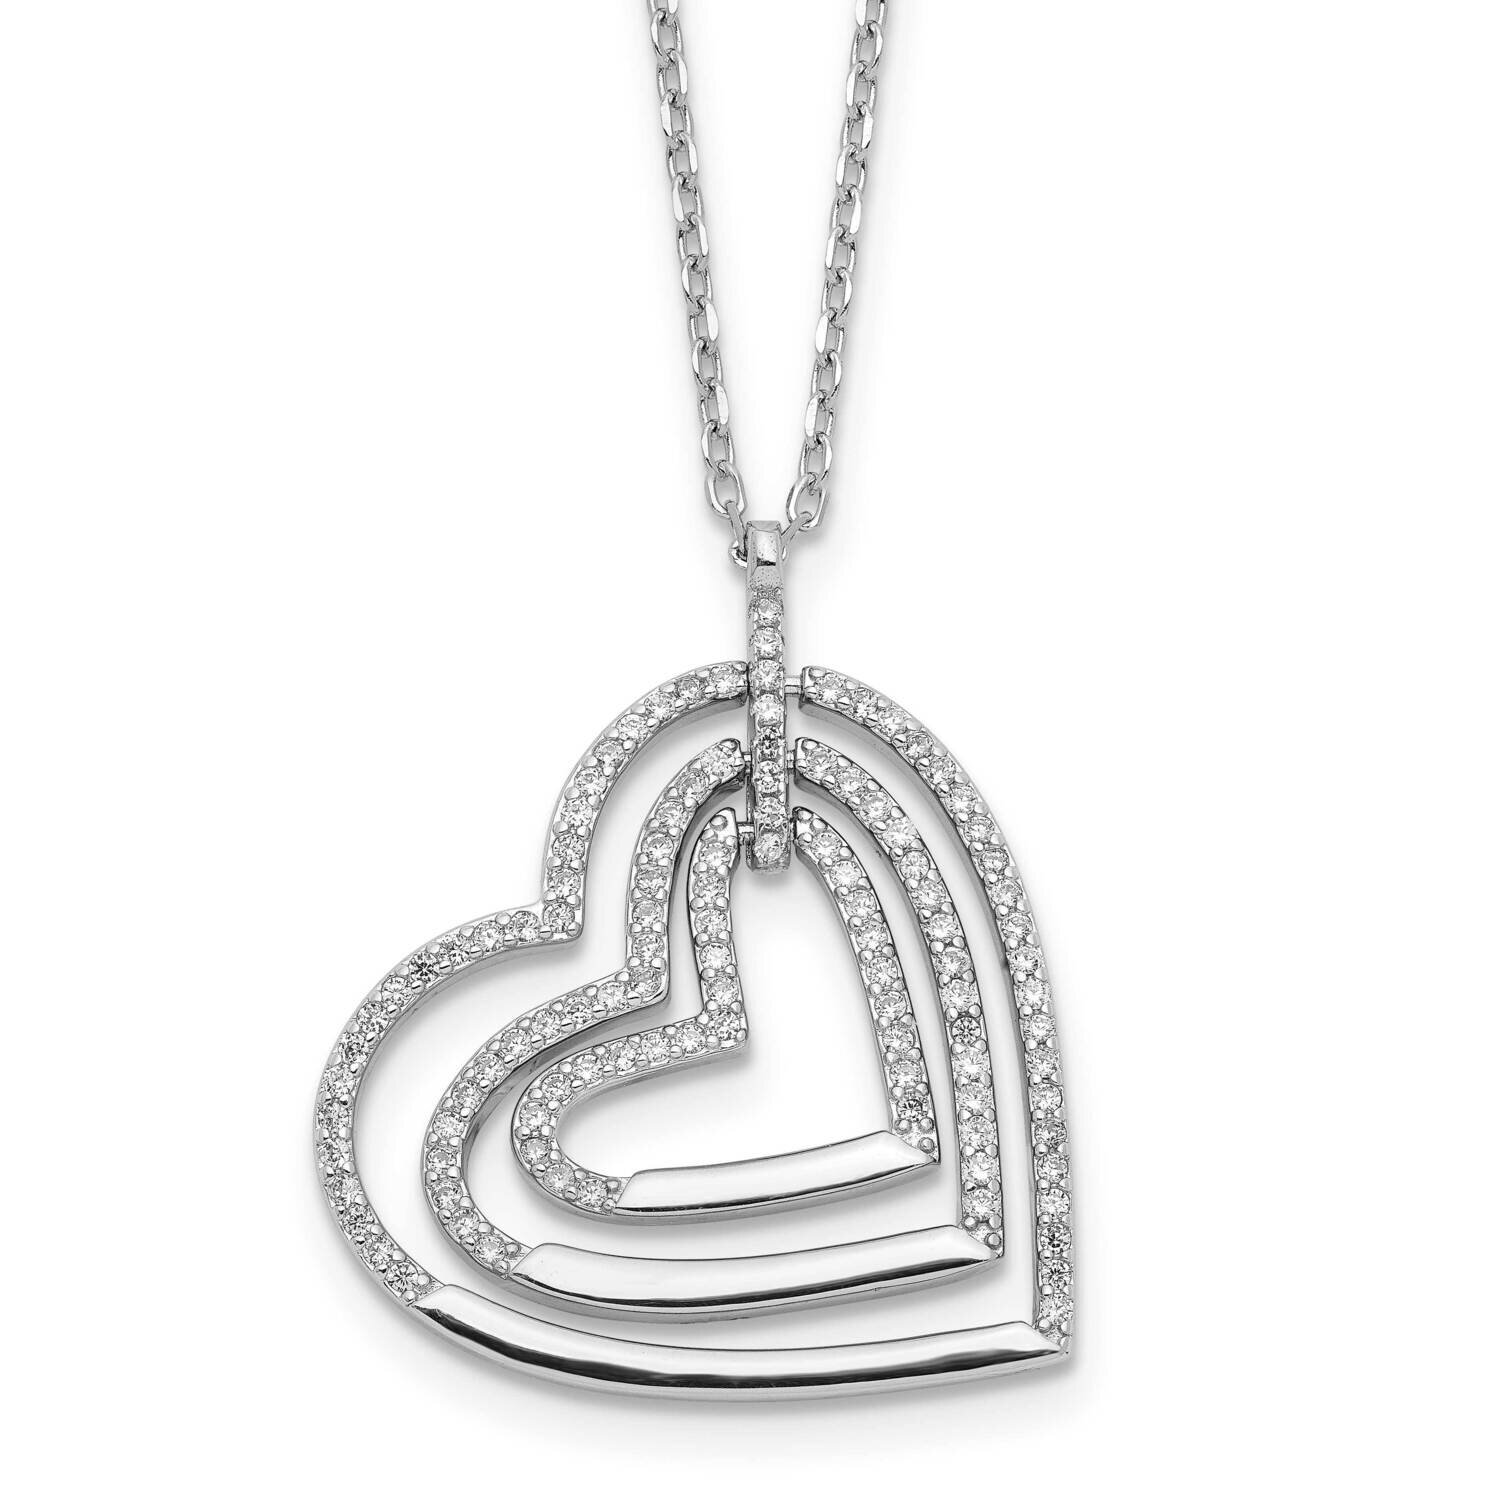 Triple Open CZ Diamond Heart with 2 In Extender Necklace 16 Inch Sterling Silver Rhodium-Plated QG6086-16